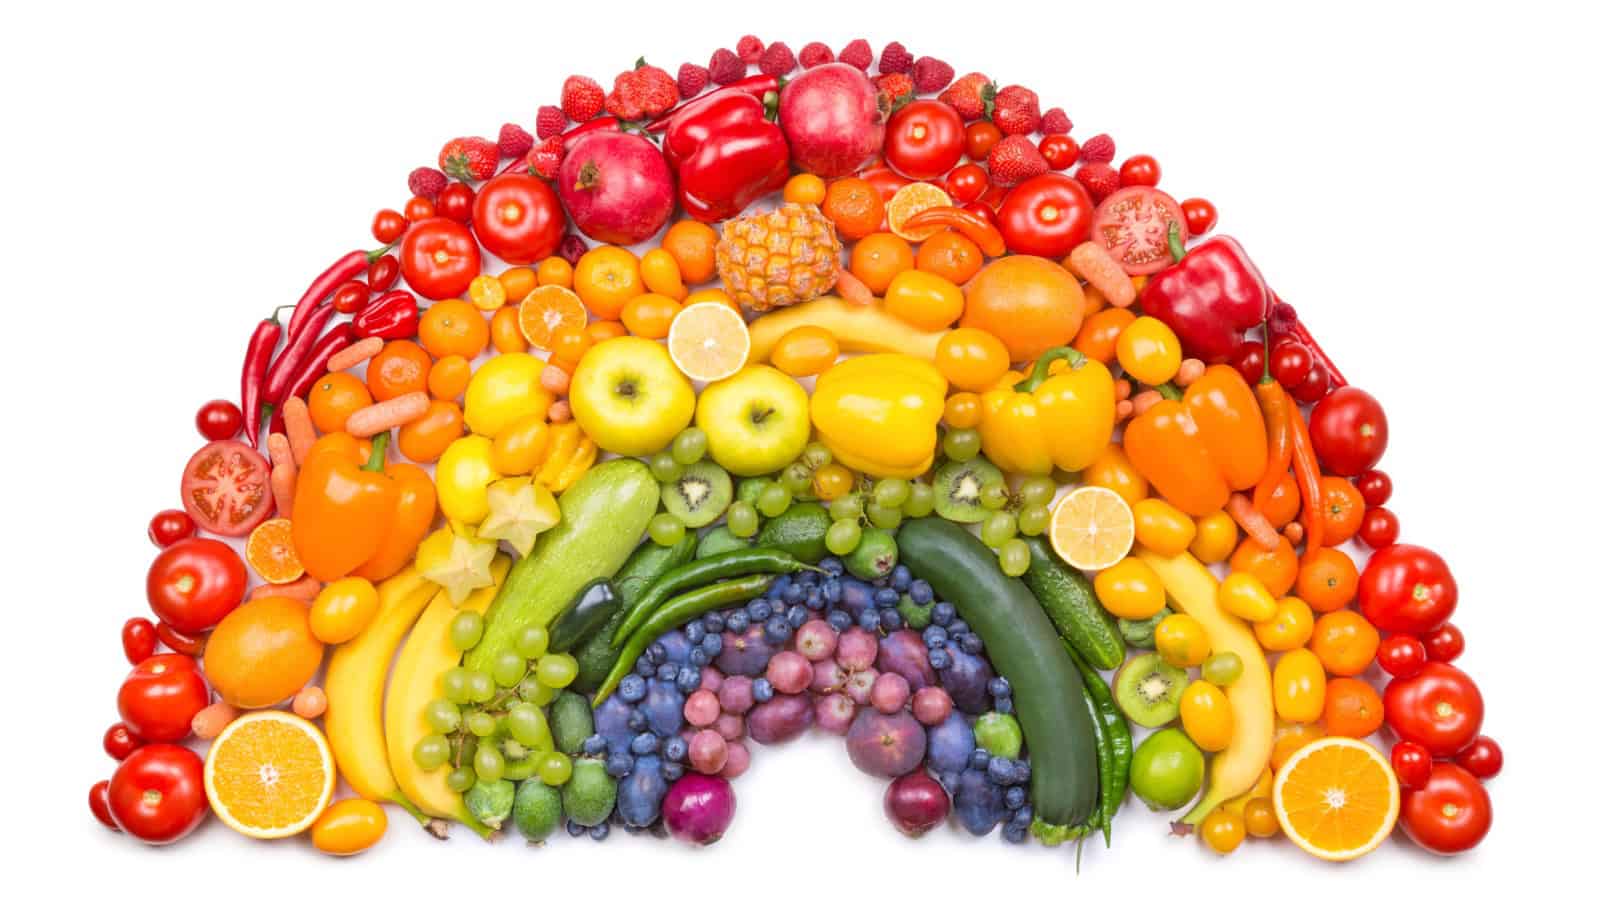 Rainbow Fruit and Vegetables.